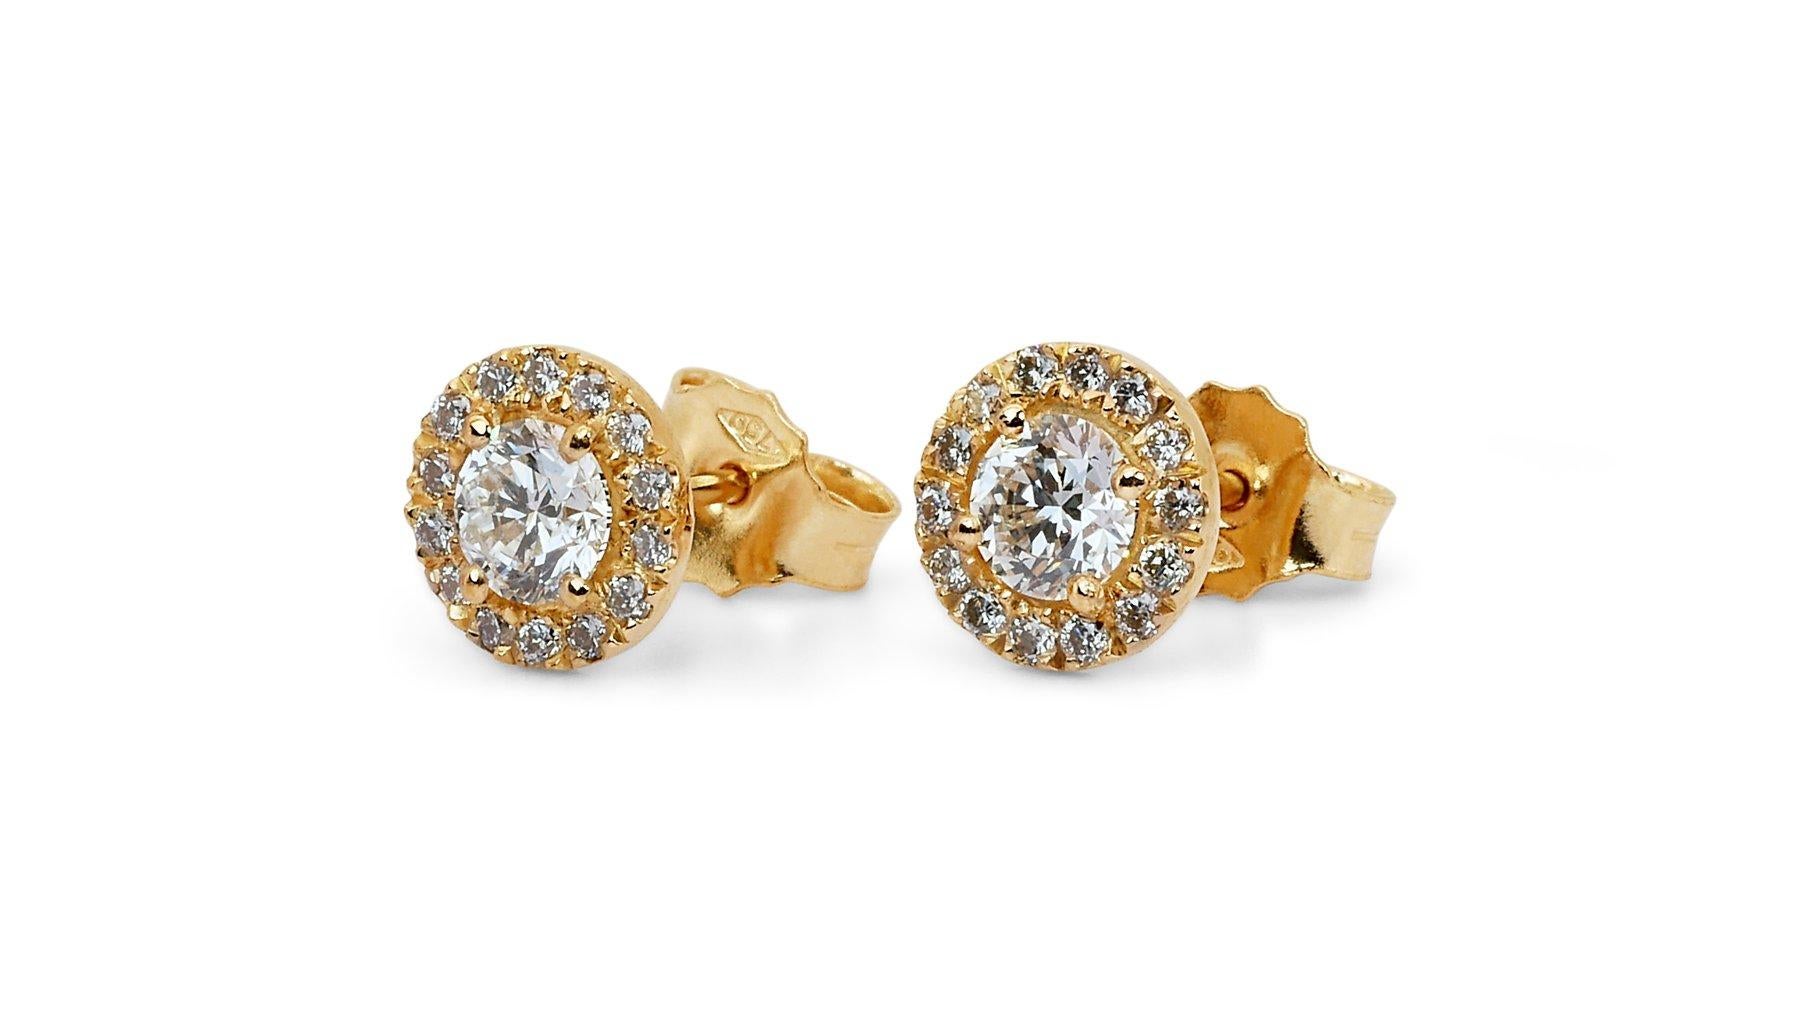 Luxurious 18 kt. Gold Earrings with 2.24 ct Natural Diamond - GIA Certificate For Sale 1